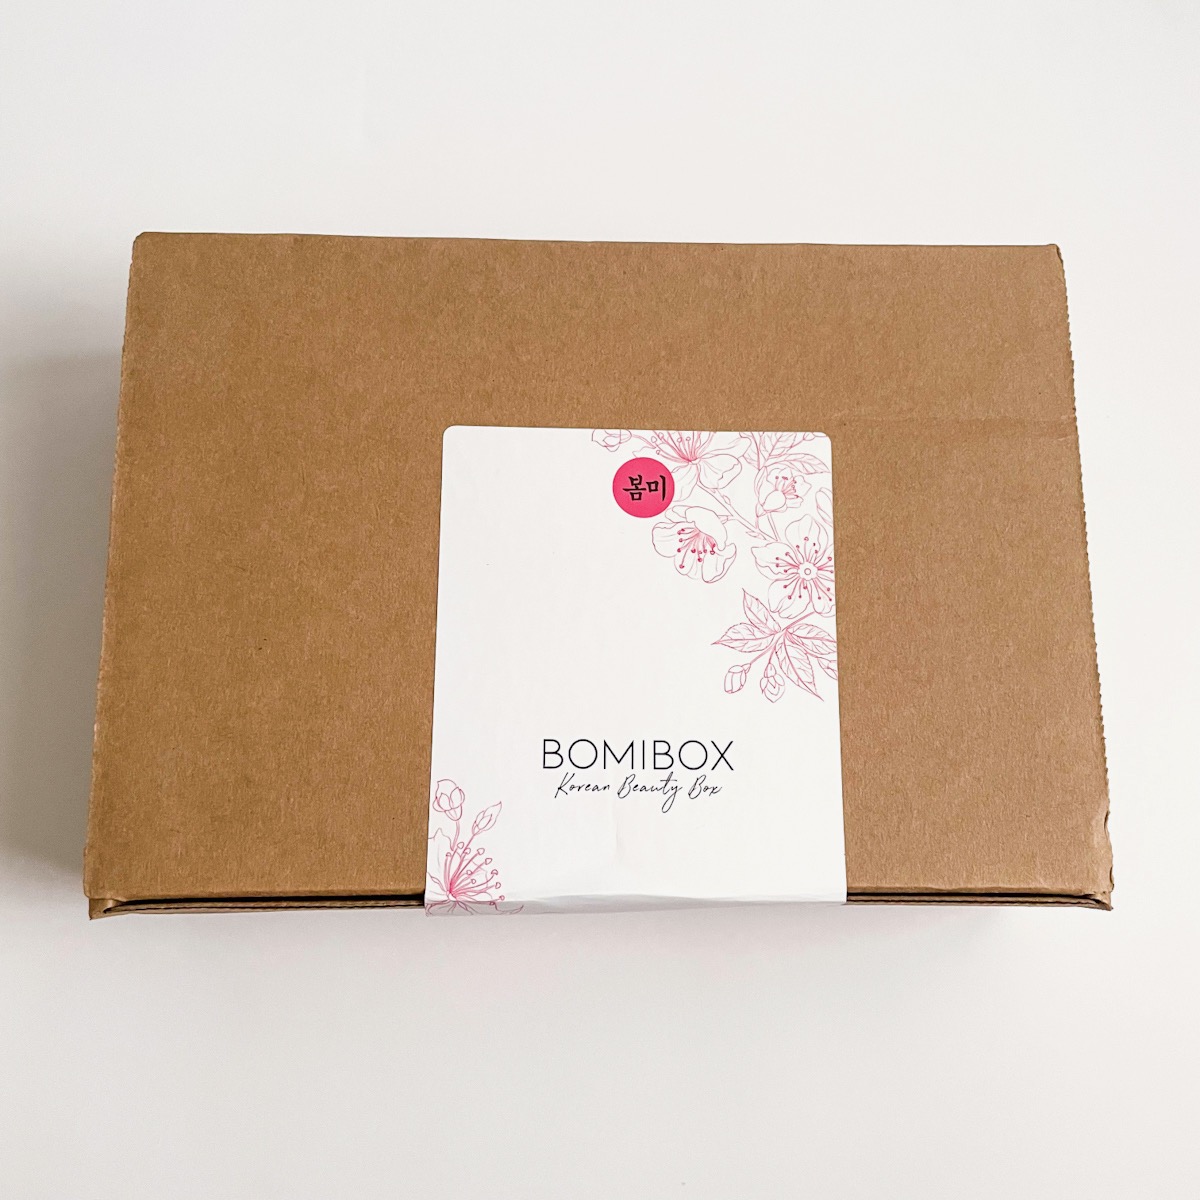 brown box with white and pink bomibox label